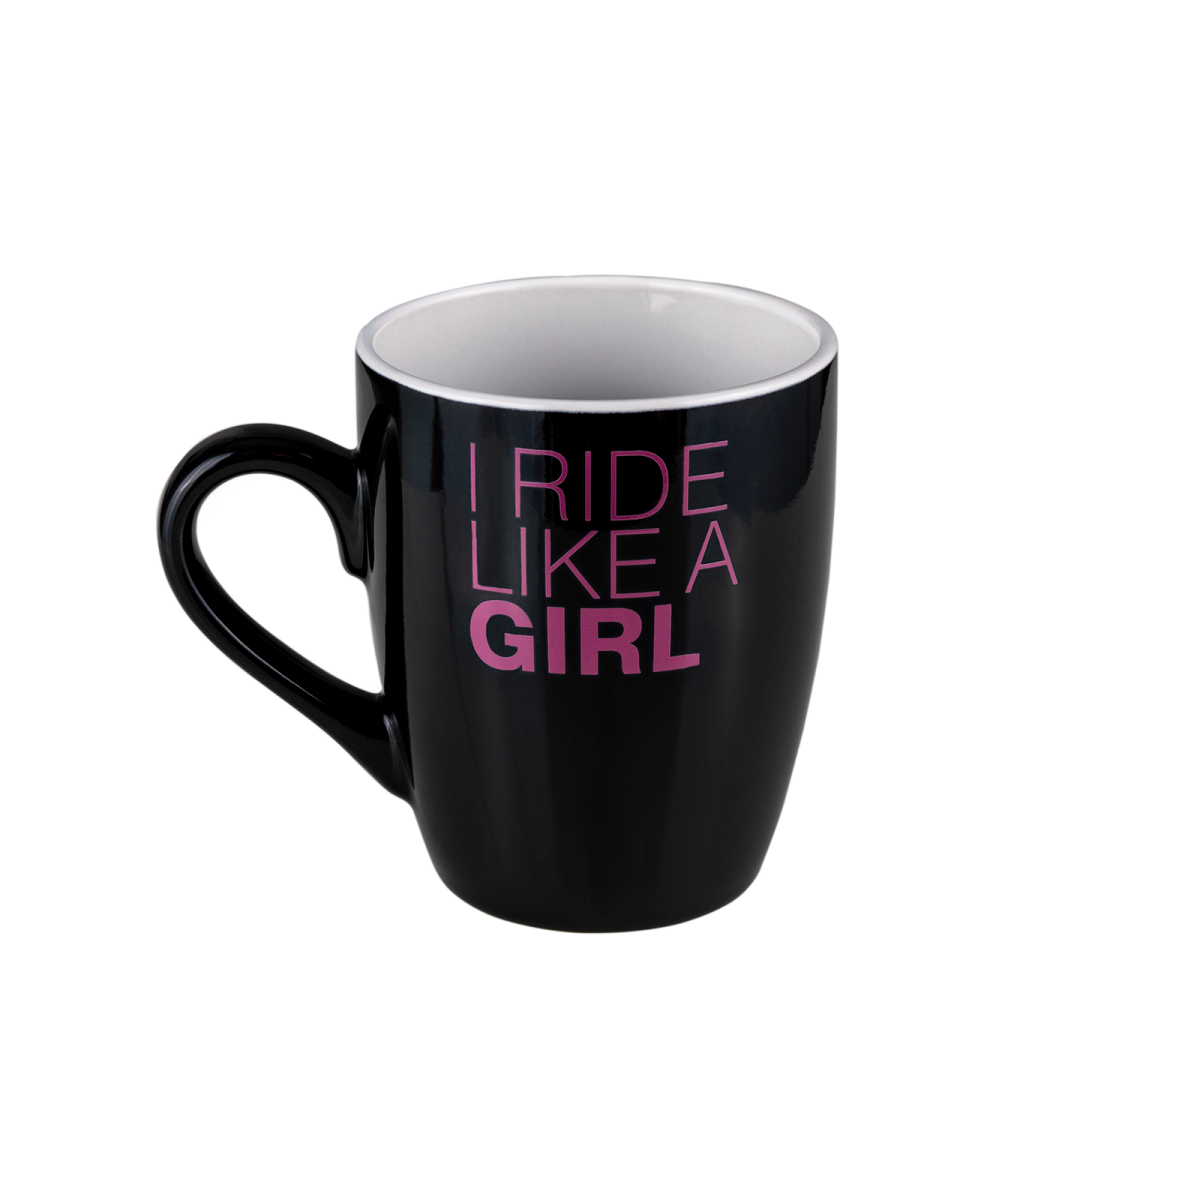 A black mug with pink logo &quot;ride like a girl&quot;